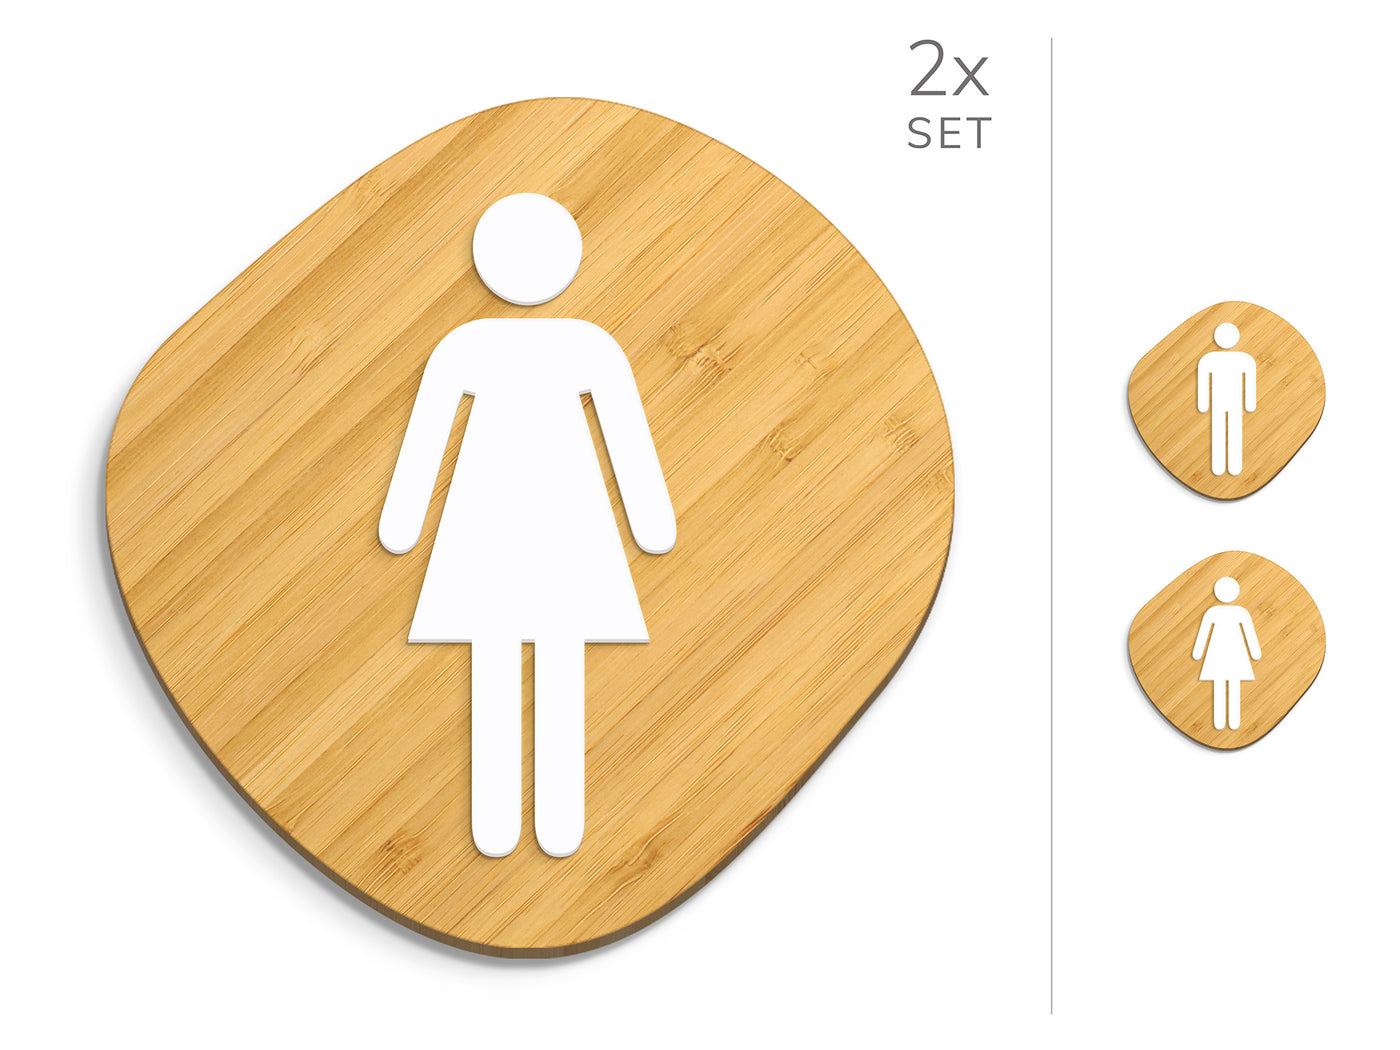 Classic, 2x Stone shaped Base - Restroom Signs Set - Man, Woman